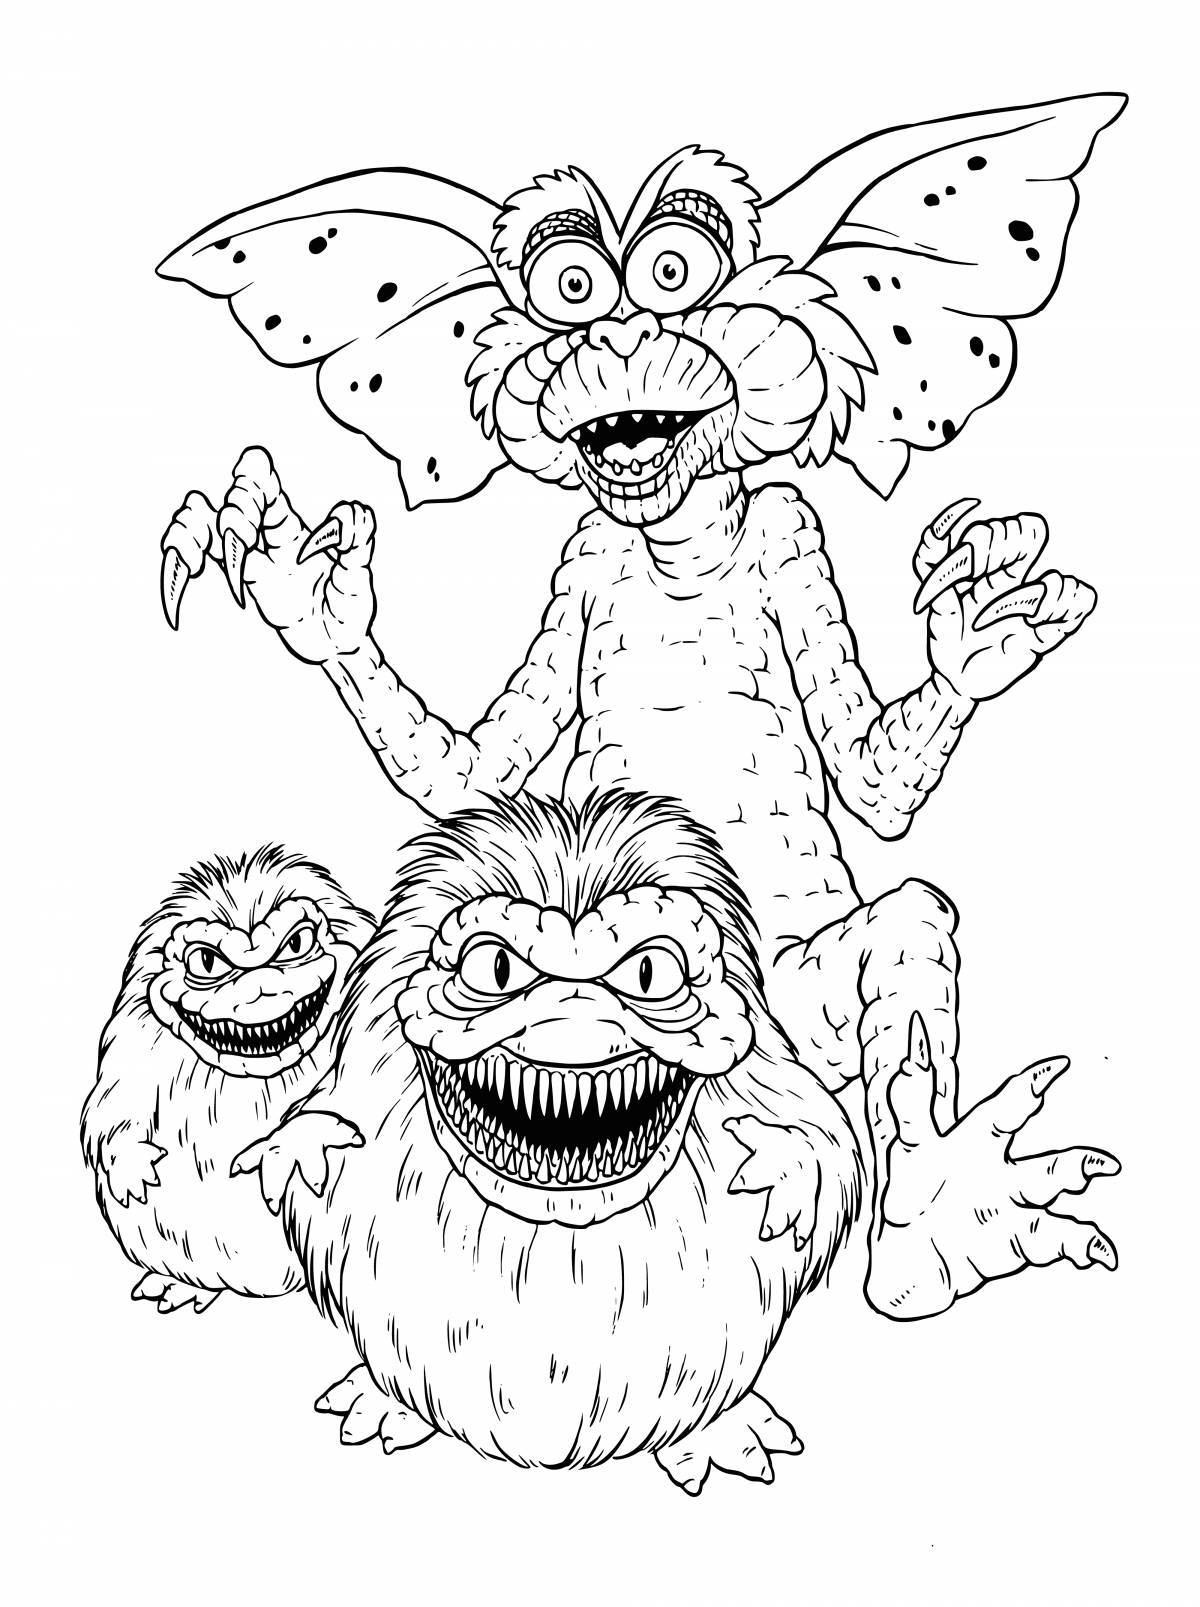 Colorful monsters coloring pages